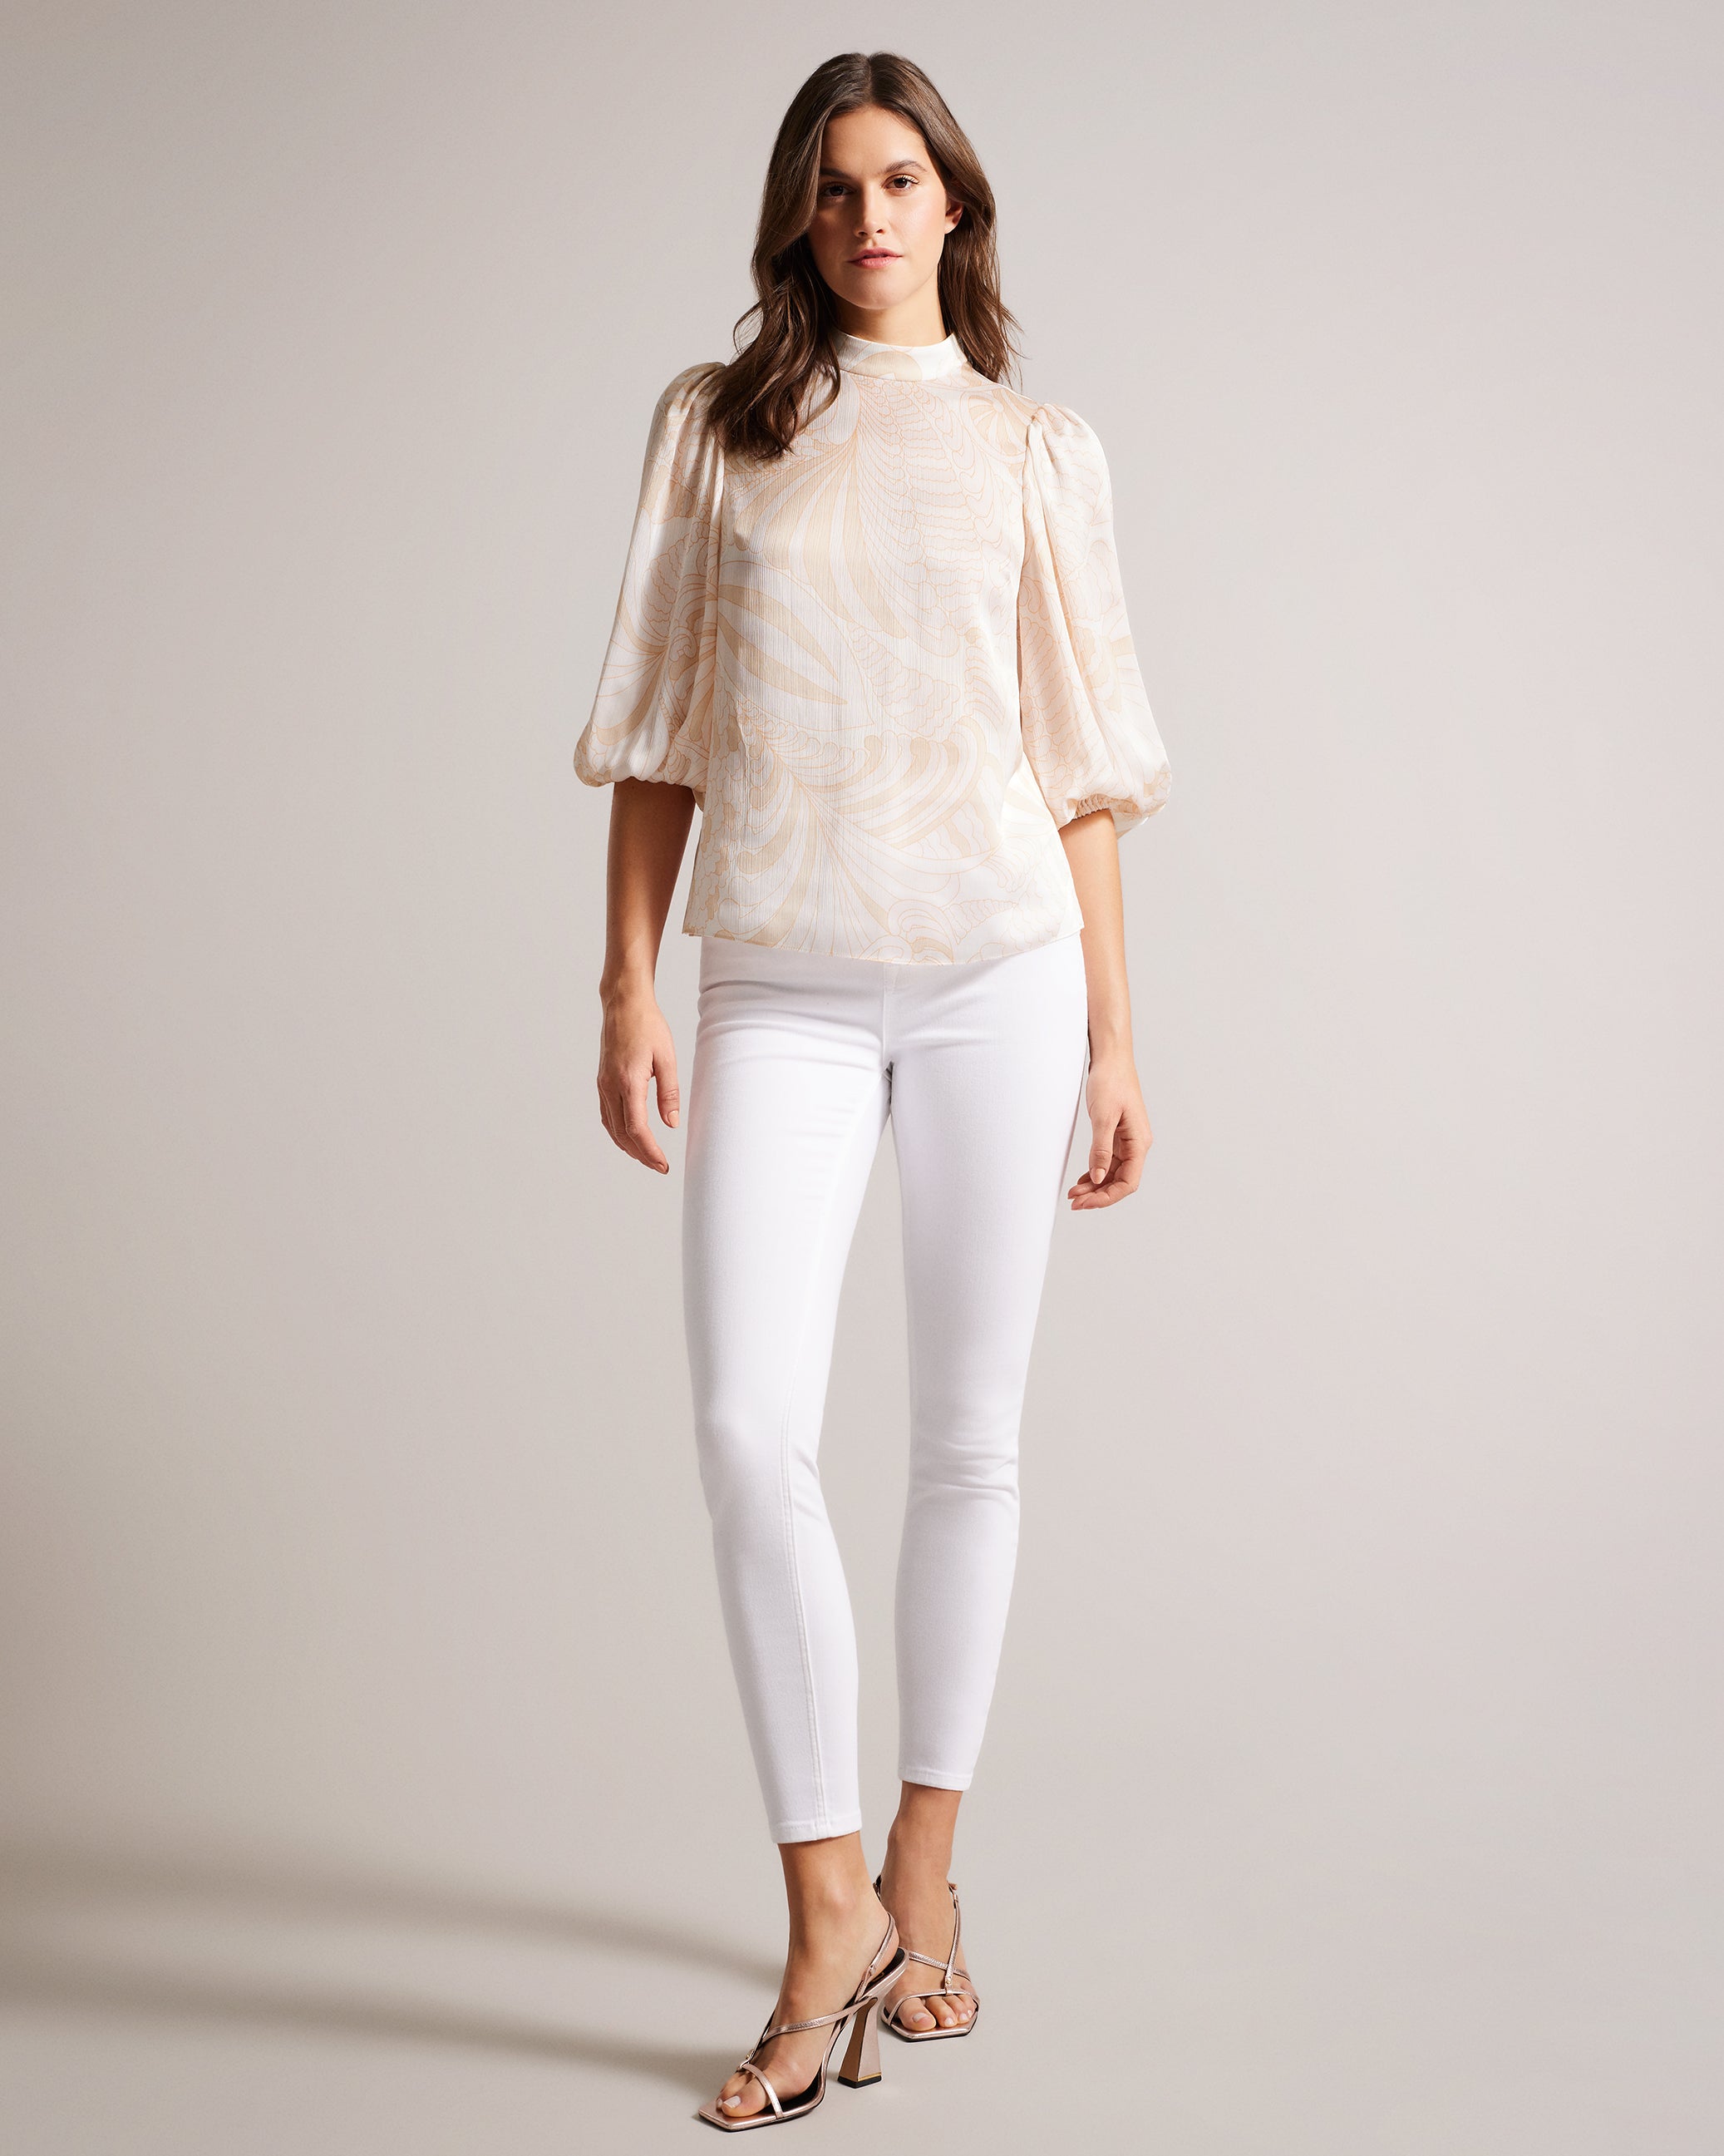 Women's Tops & T-Shirts – Ted Baker, Canada